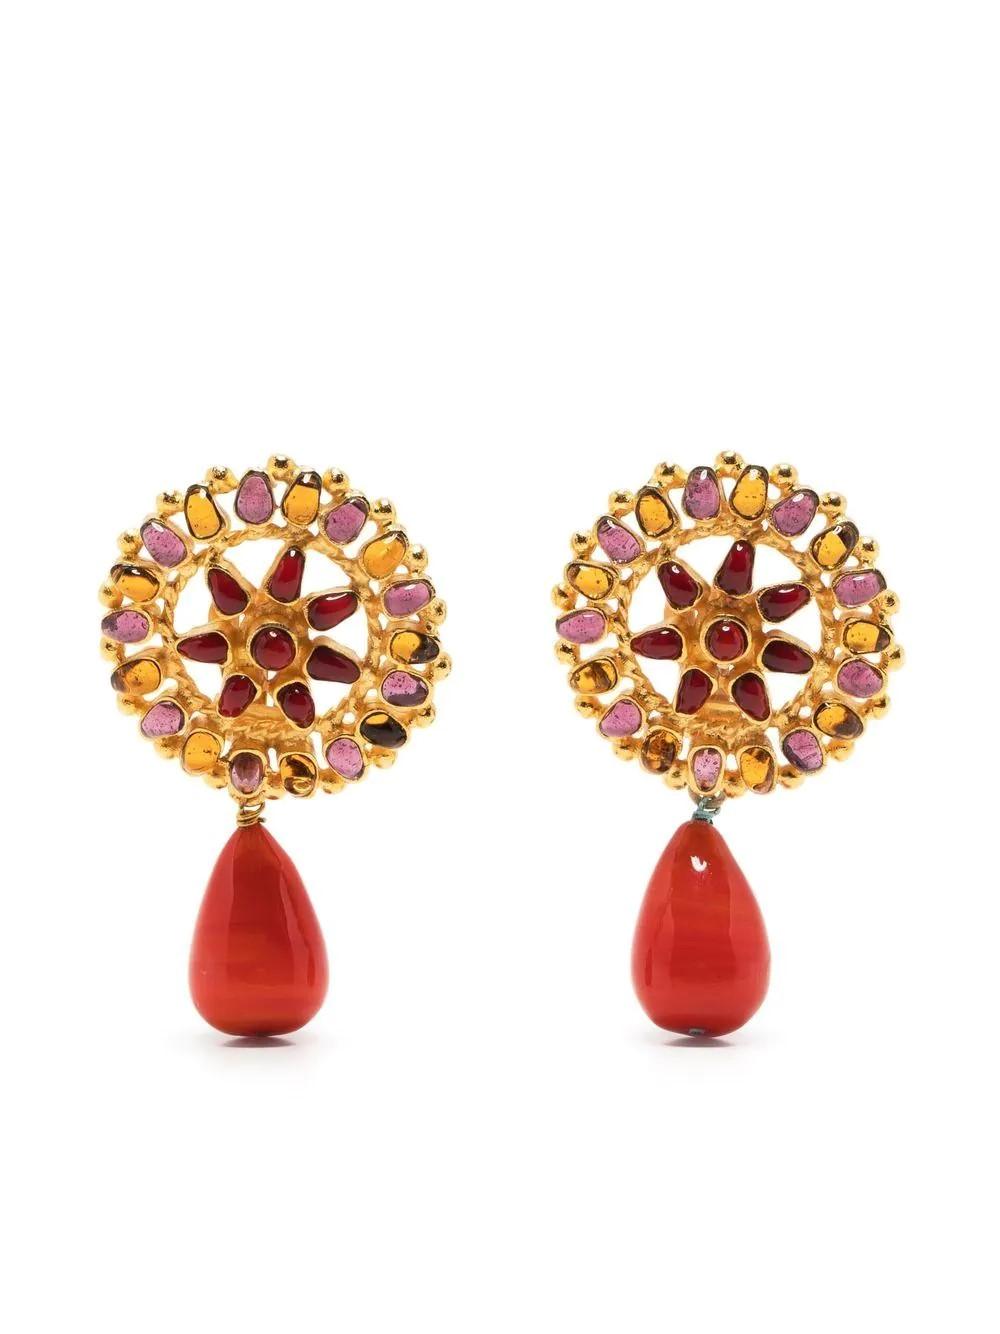 Chanel Gripoix Coral Drop Earrings Signed 1996 In Good Condition For Sale In London, GB